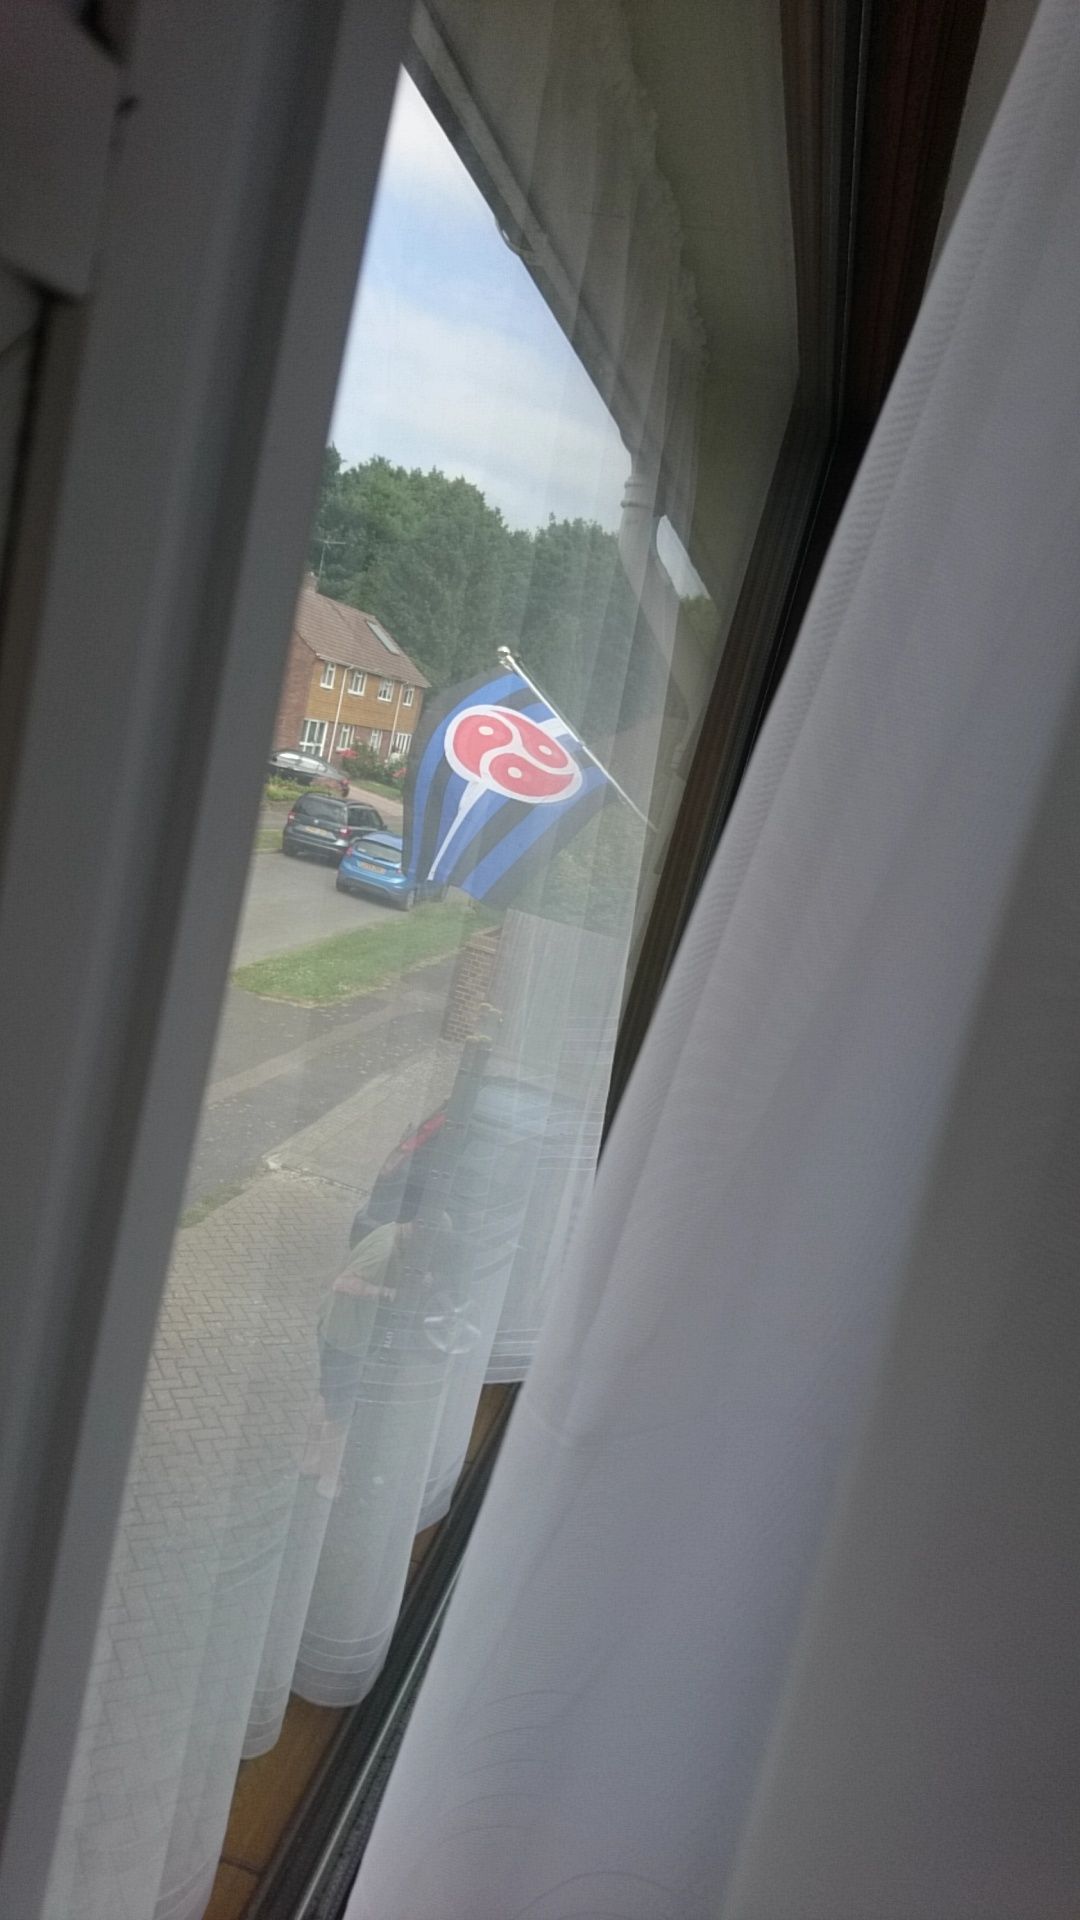 My grandad liked the look of this flag so he bought it and put it on the front of our house, we just found out its the BDSM flag.